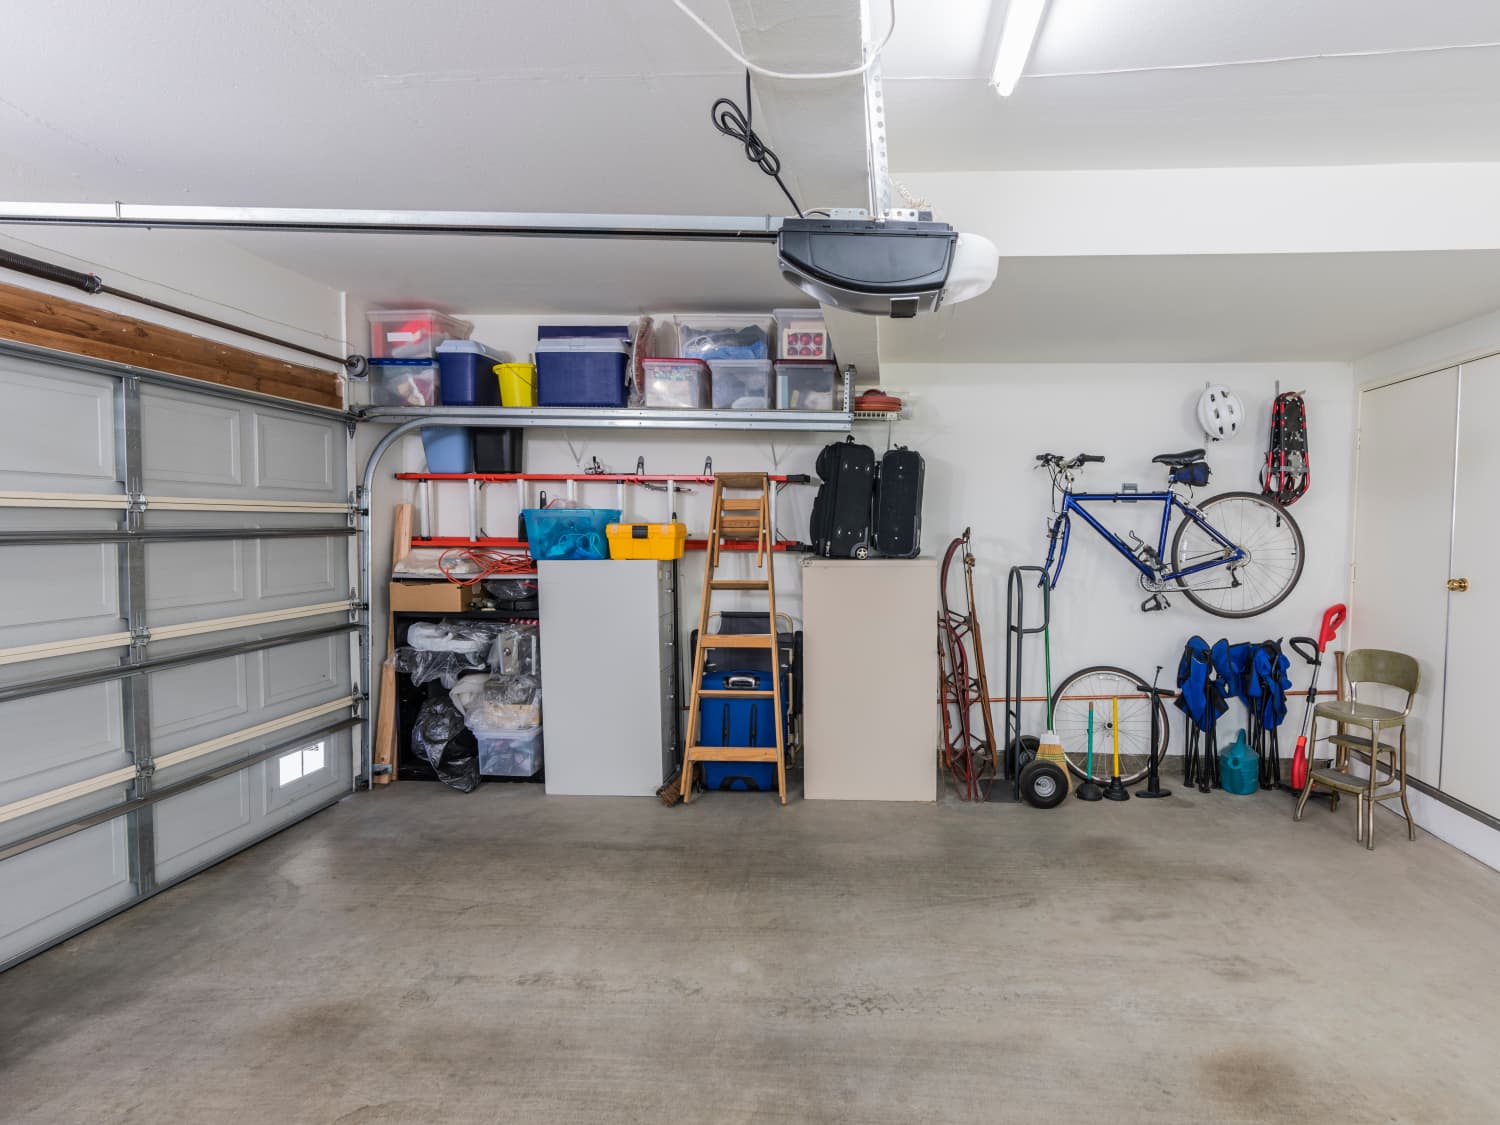 6 Things in Your Garage You Should Get Rid of Right Now, According